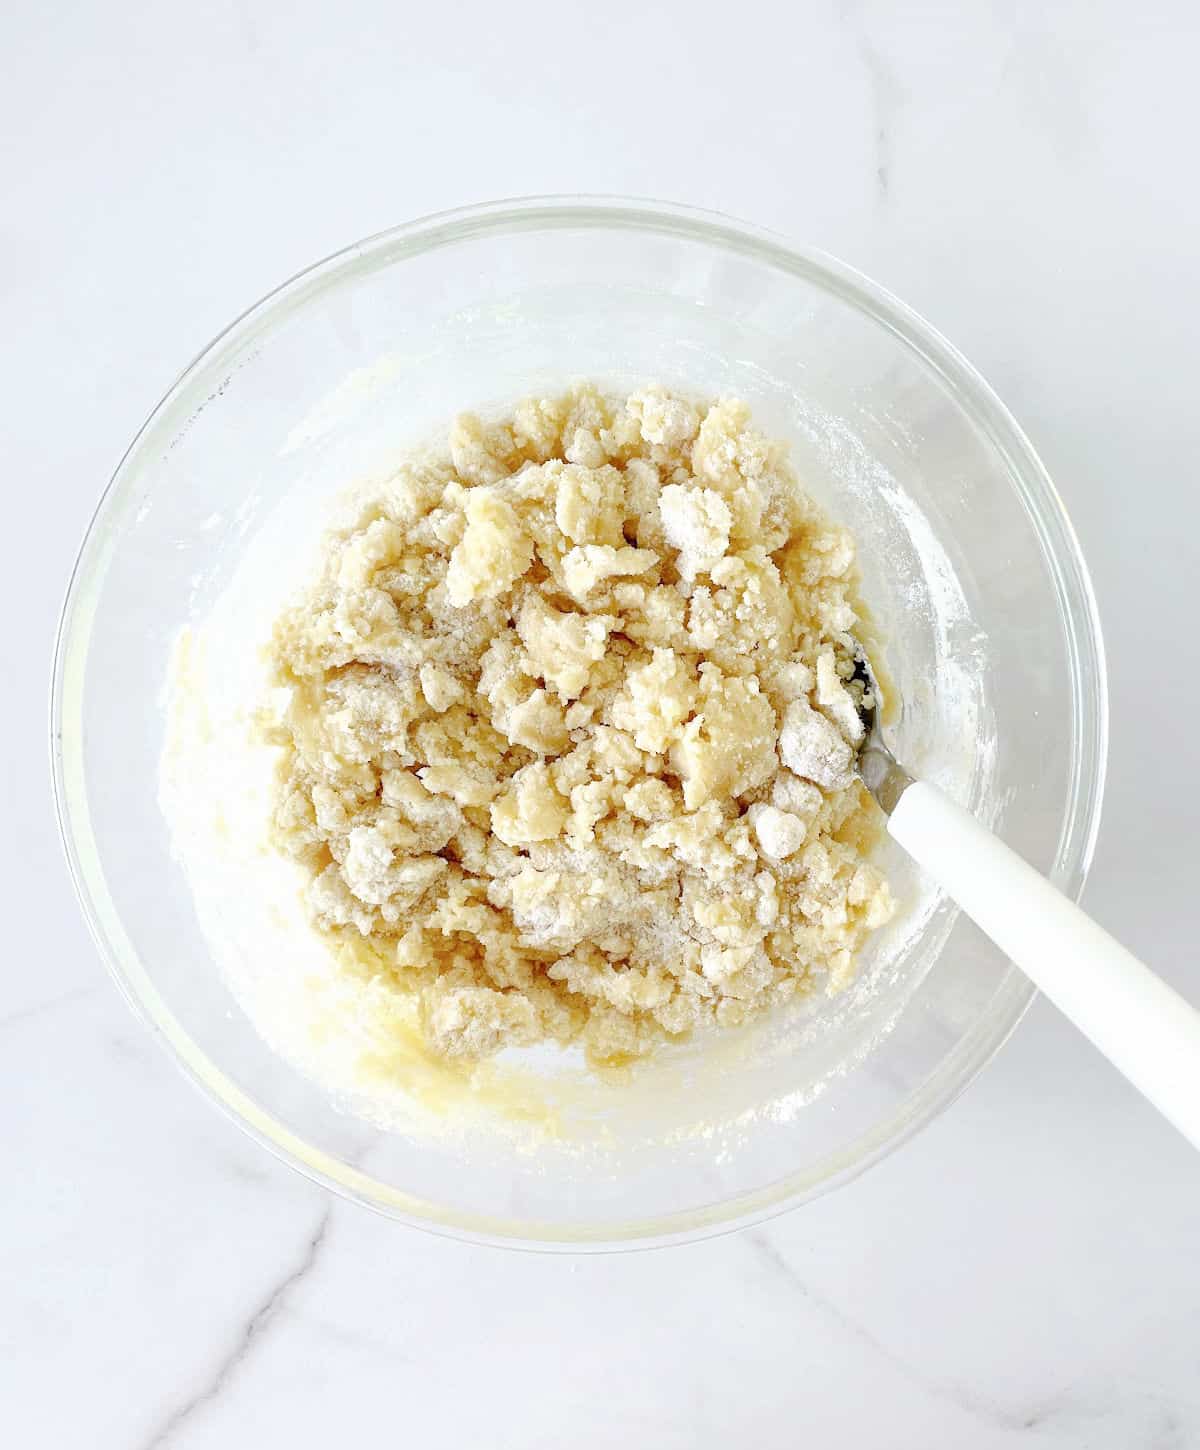 Crumbly dump cake topping on a glass bowl with a white spoon. White marble surface.